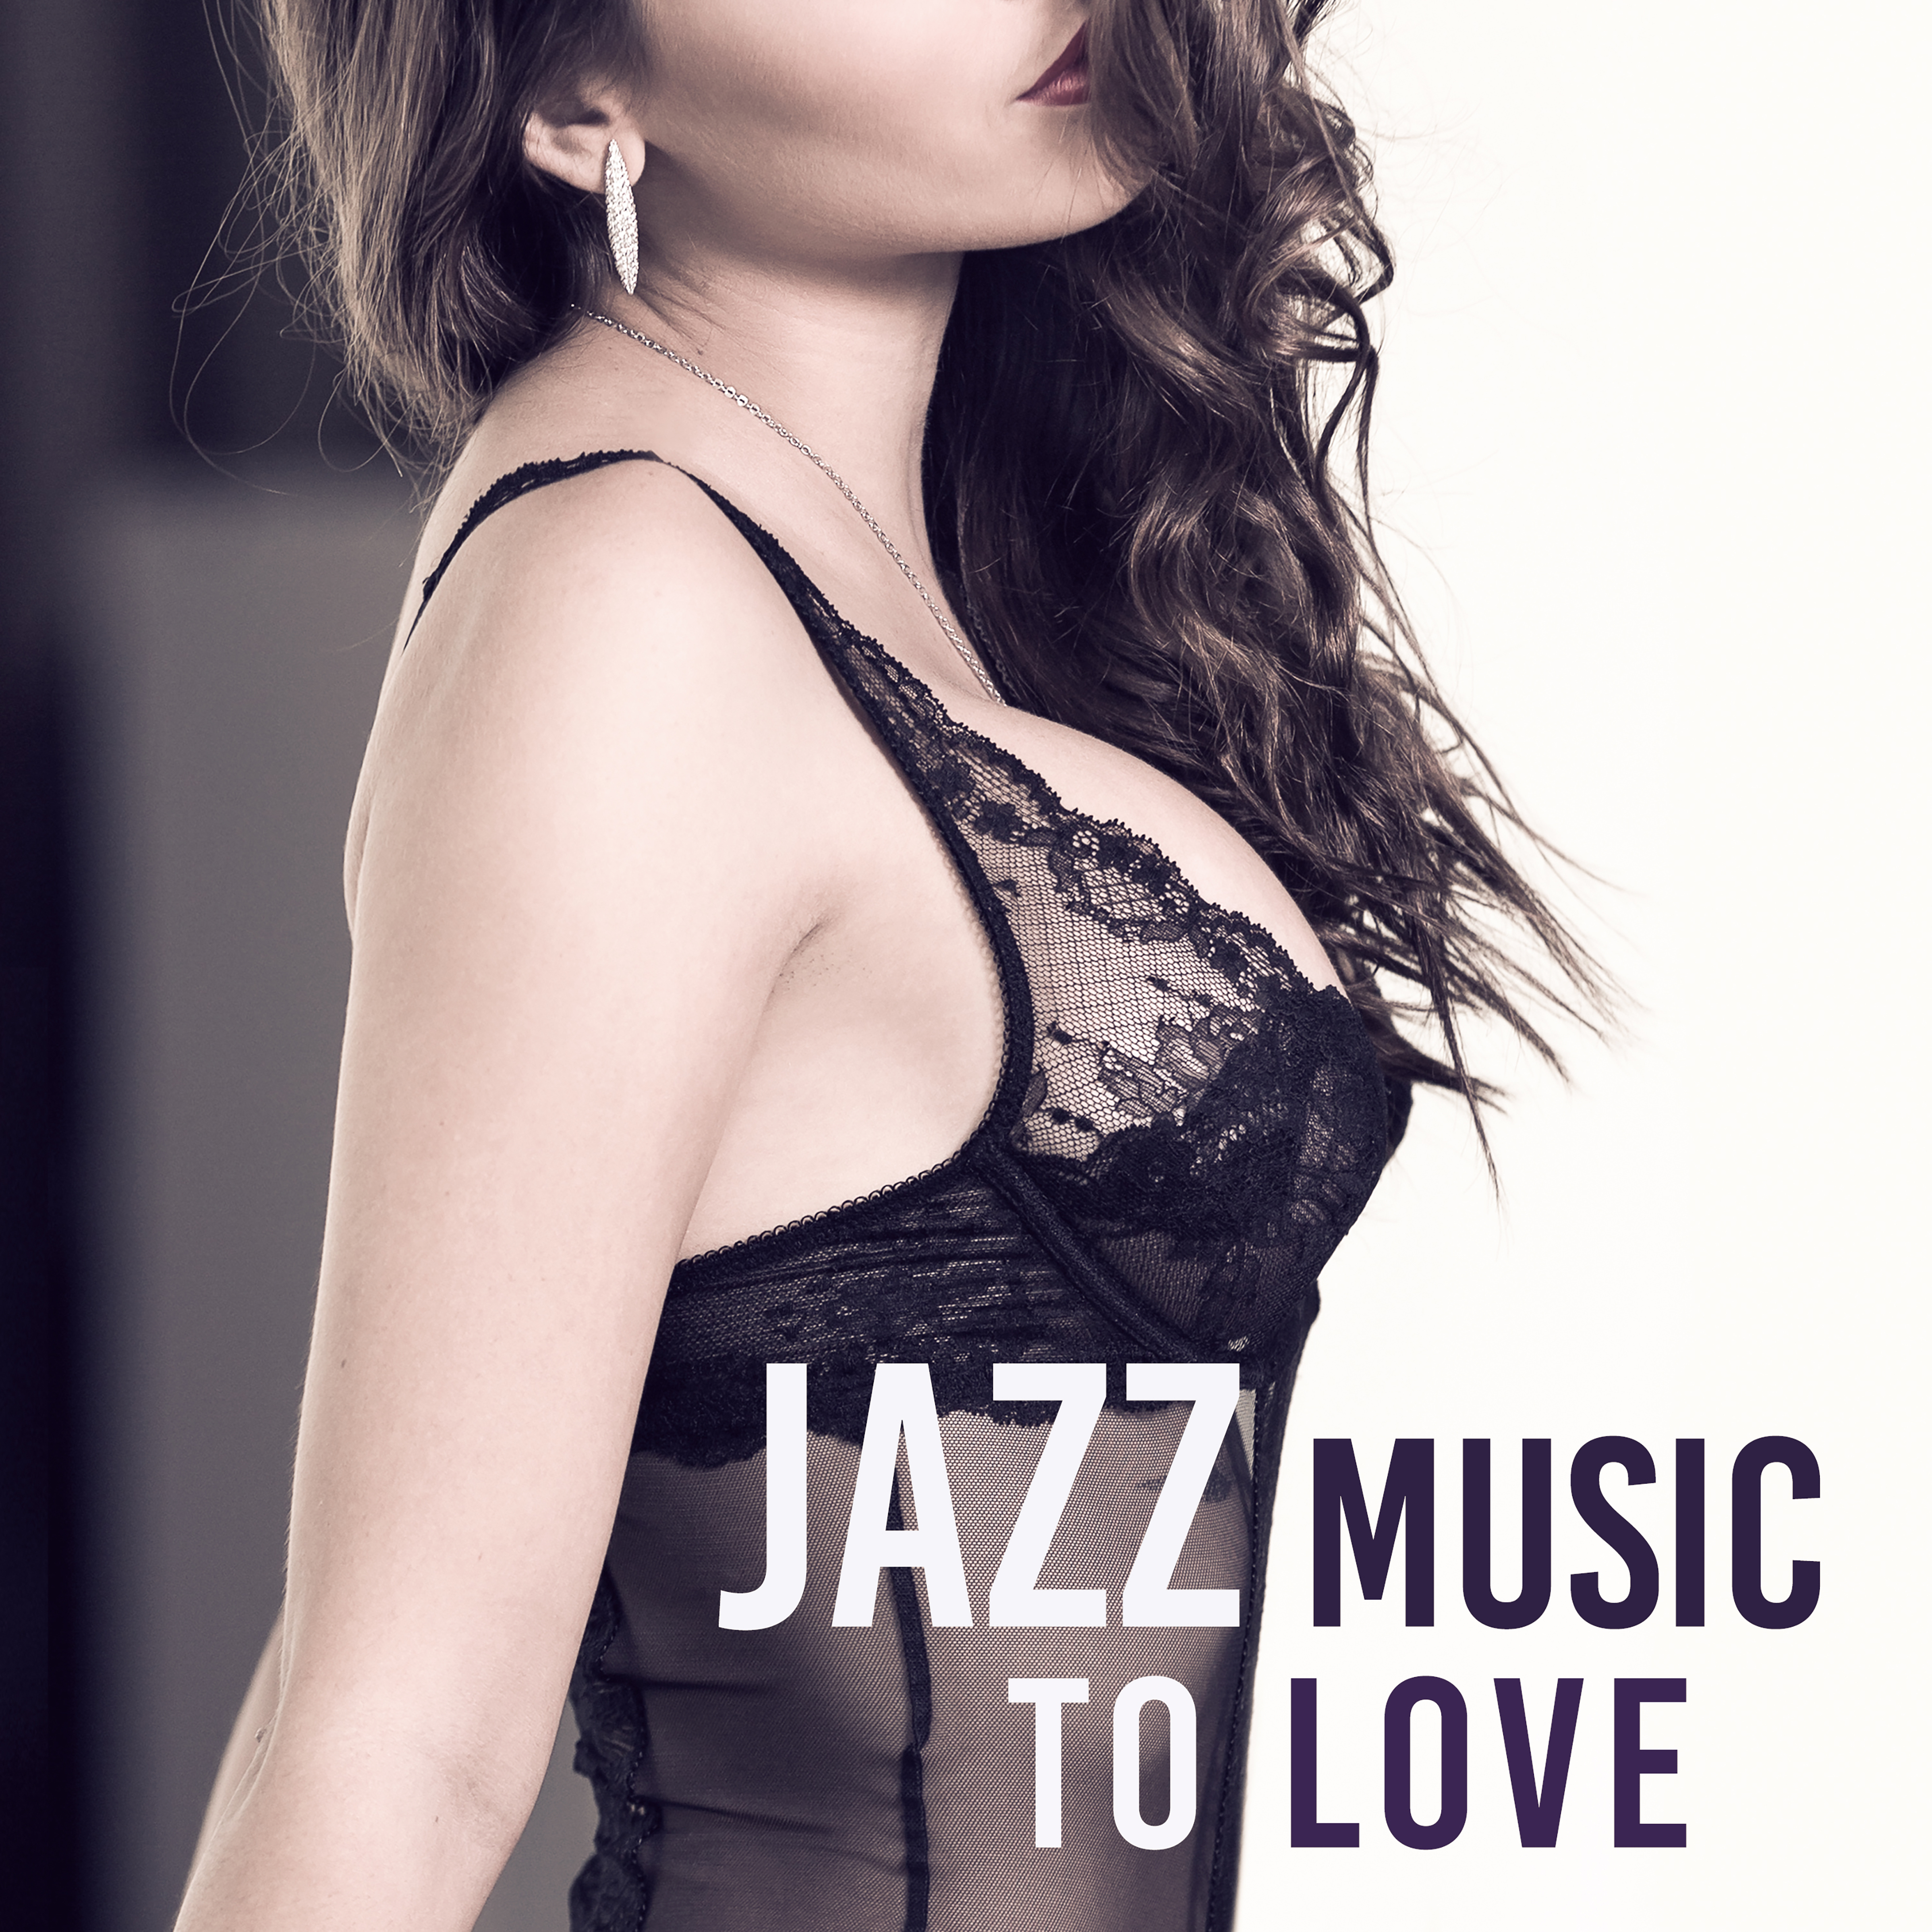 Jazz Music to Love  Calming Jazz for Romantic Evening, Soothing Jazz Music, Sounds to Rest, Sensual Piano Bar